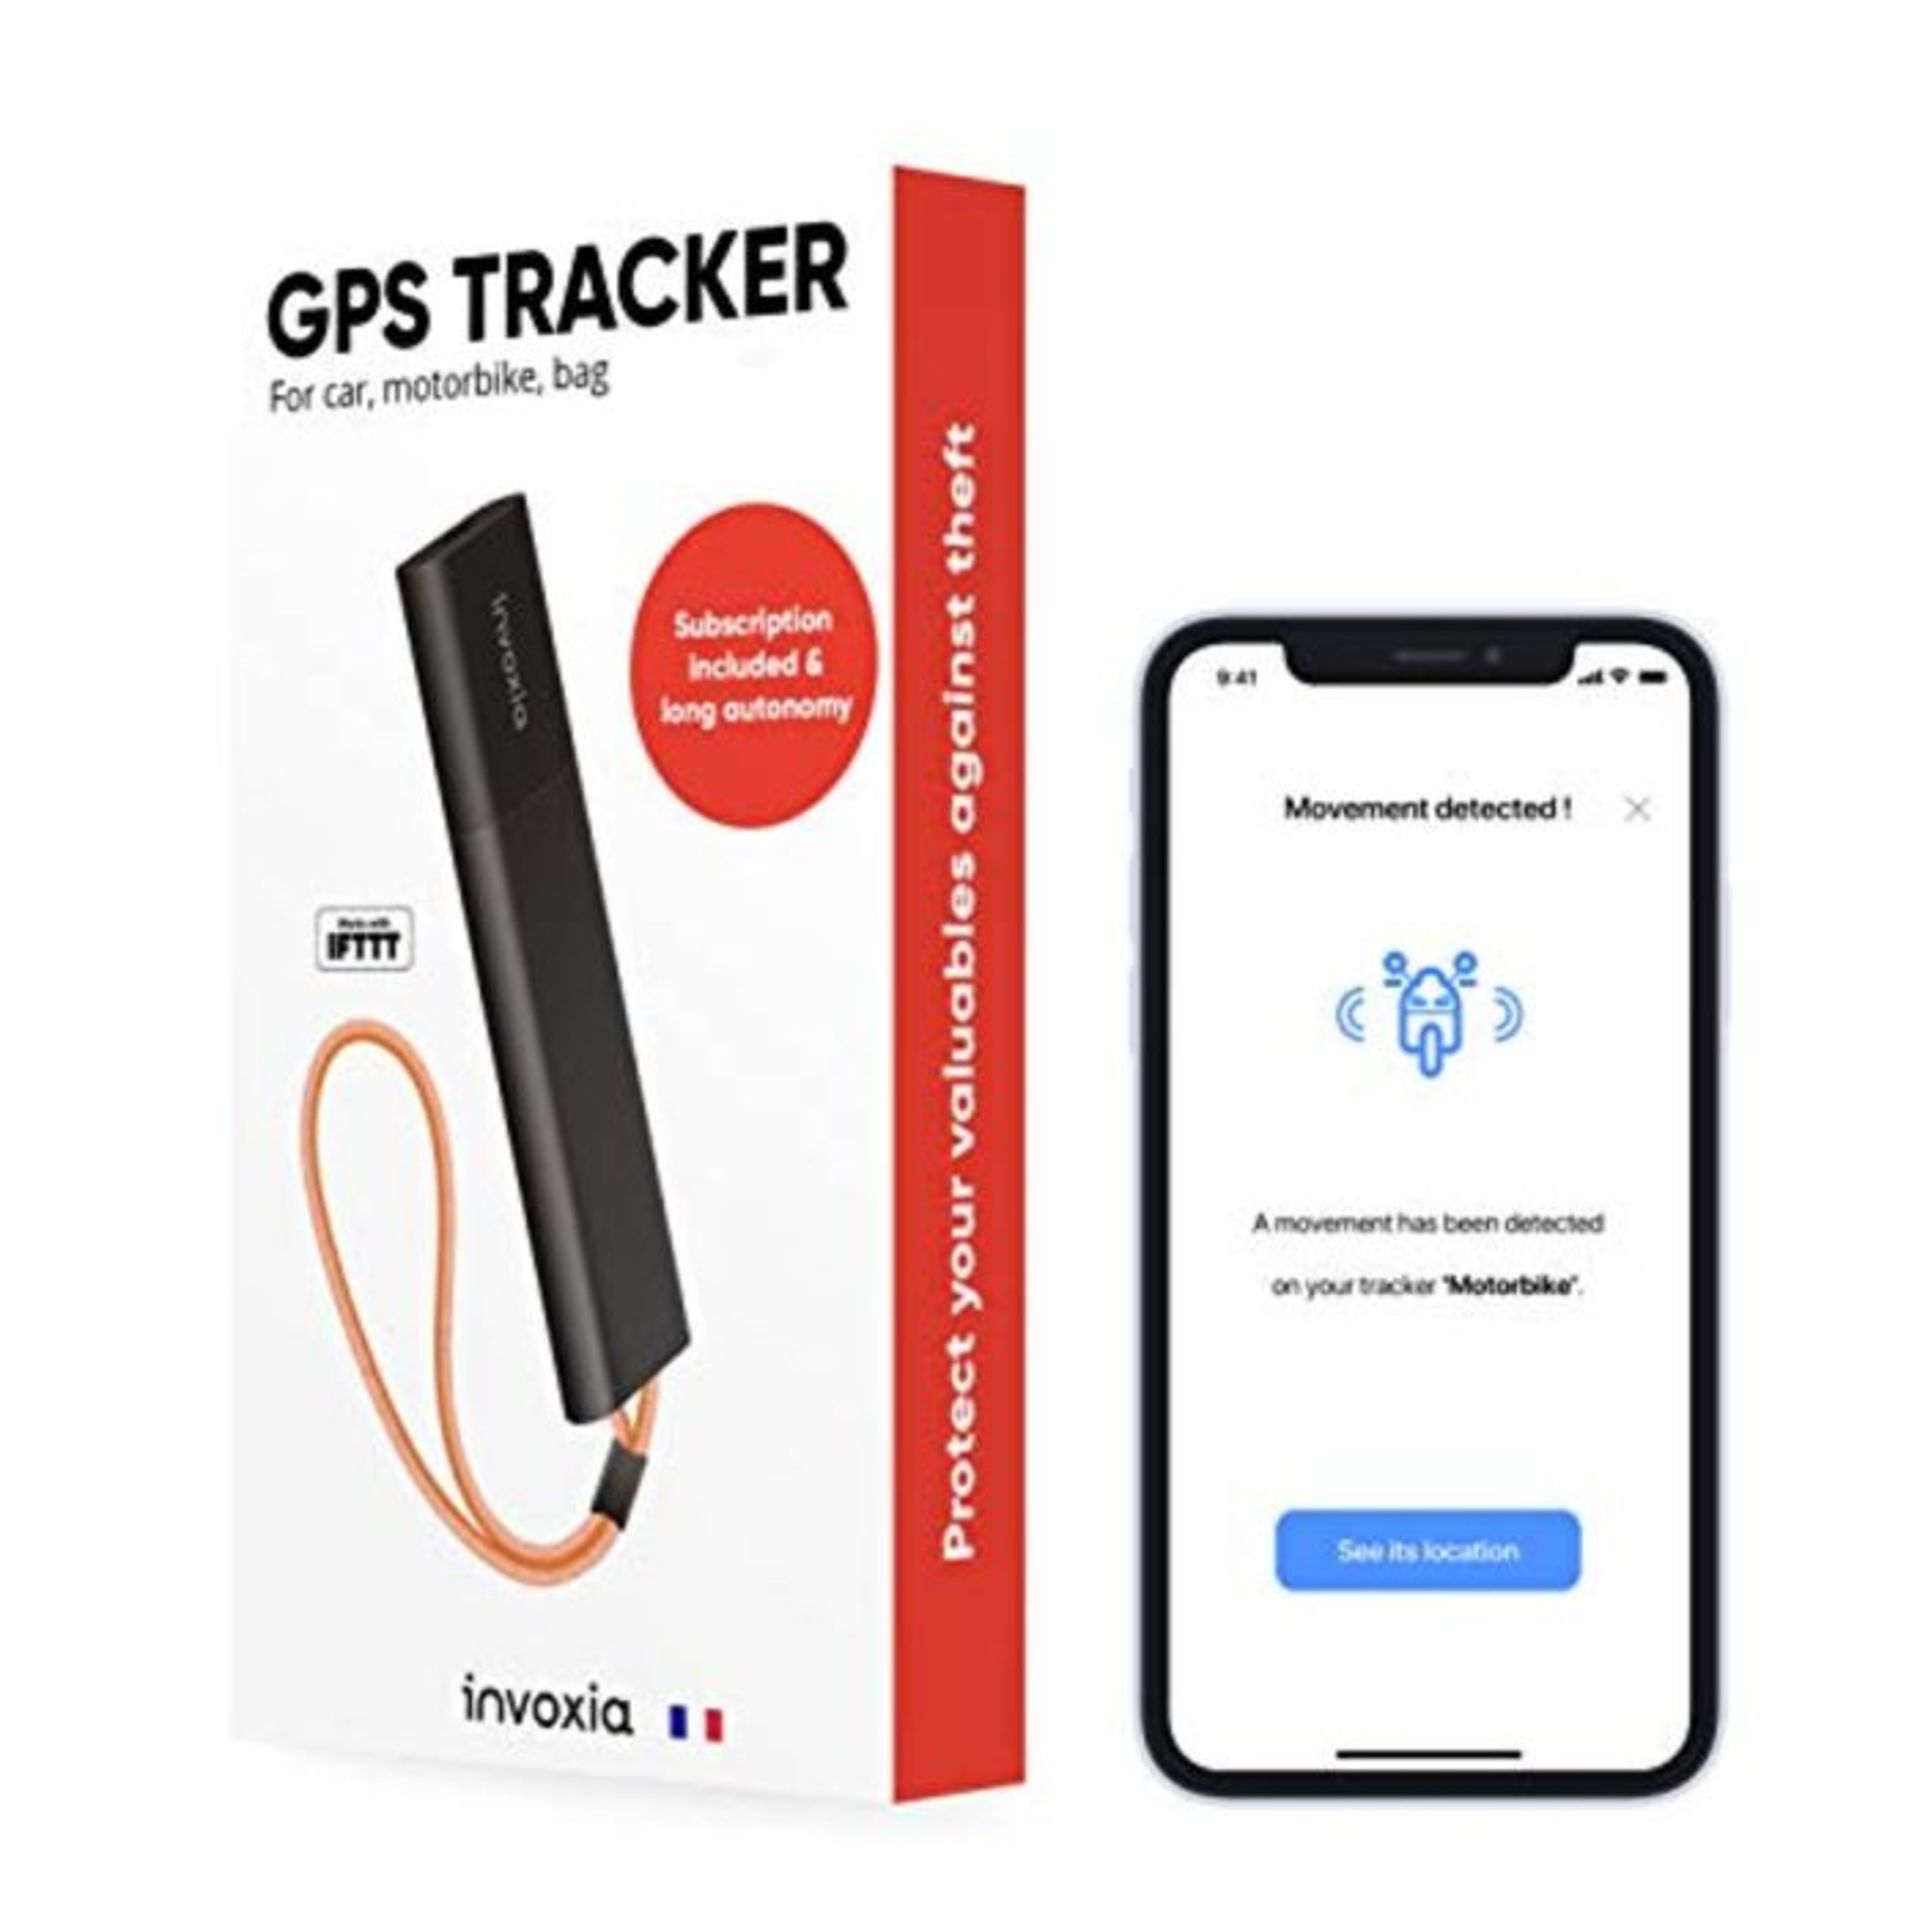 RRP £109.00 invoxia GPS Tracker with anti-theft alert - subscription included - Track: your car, m